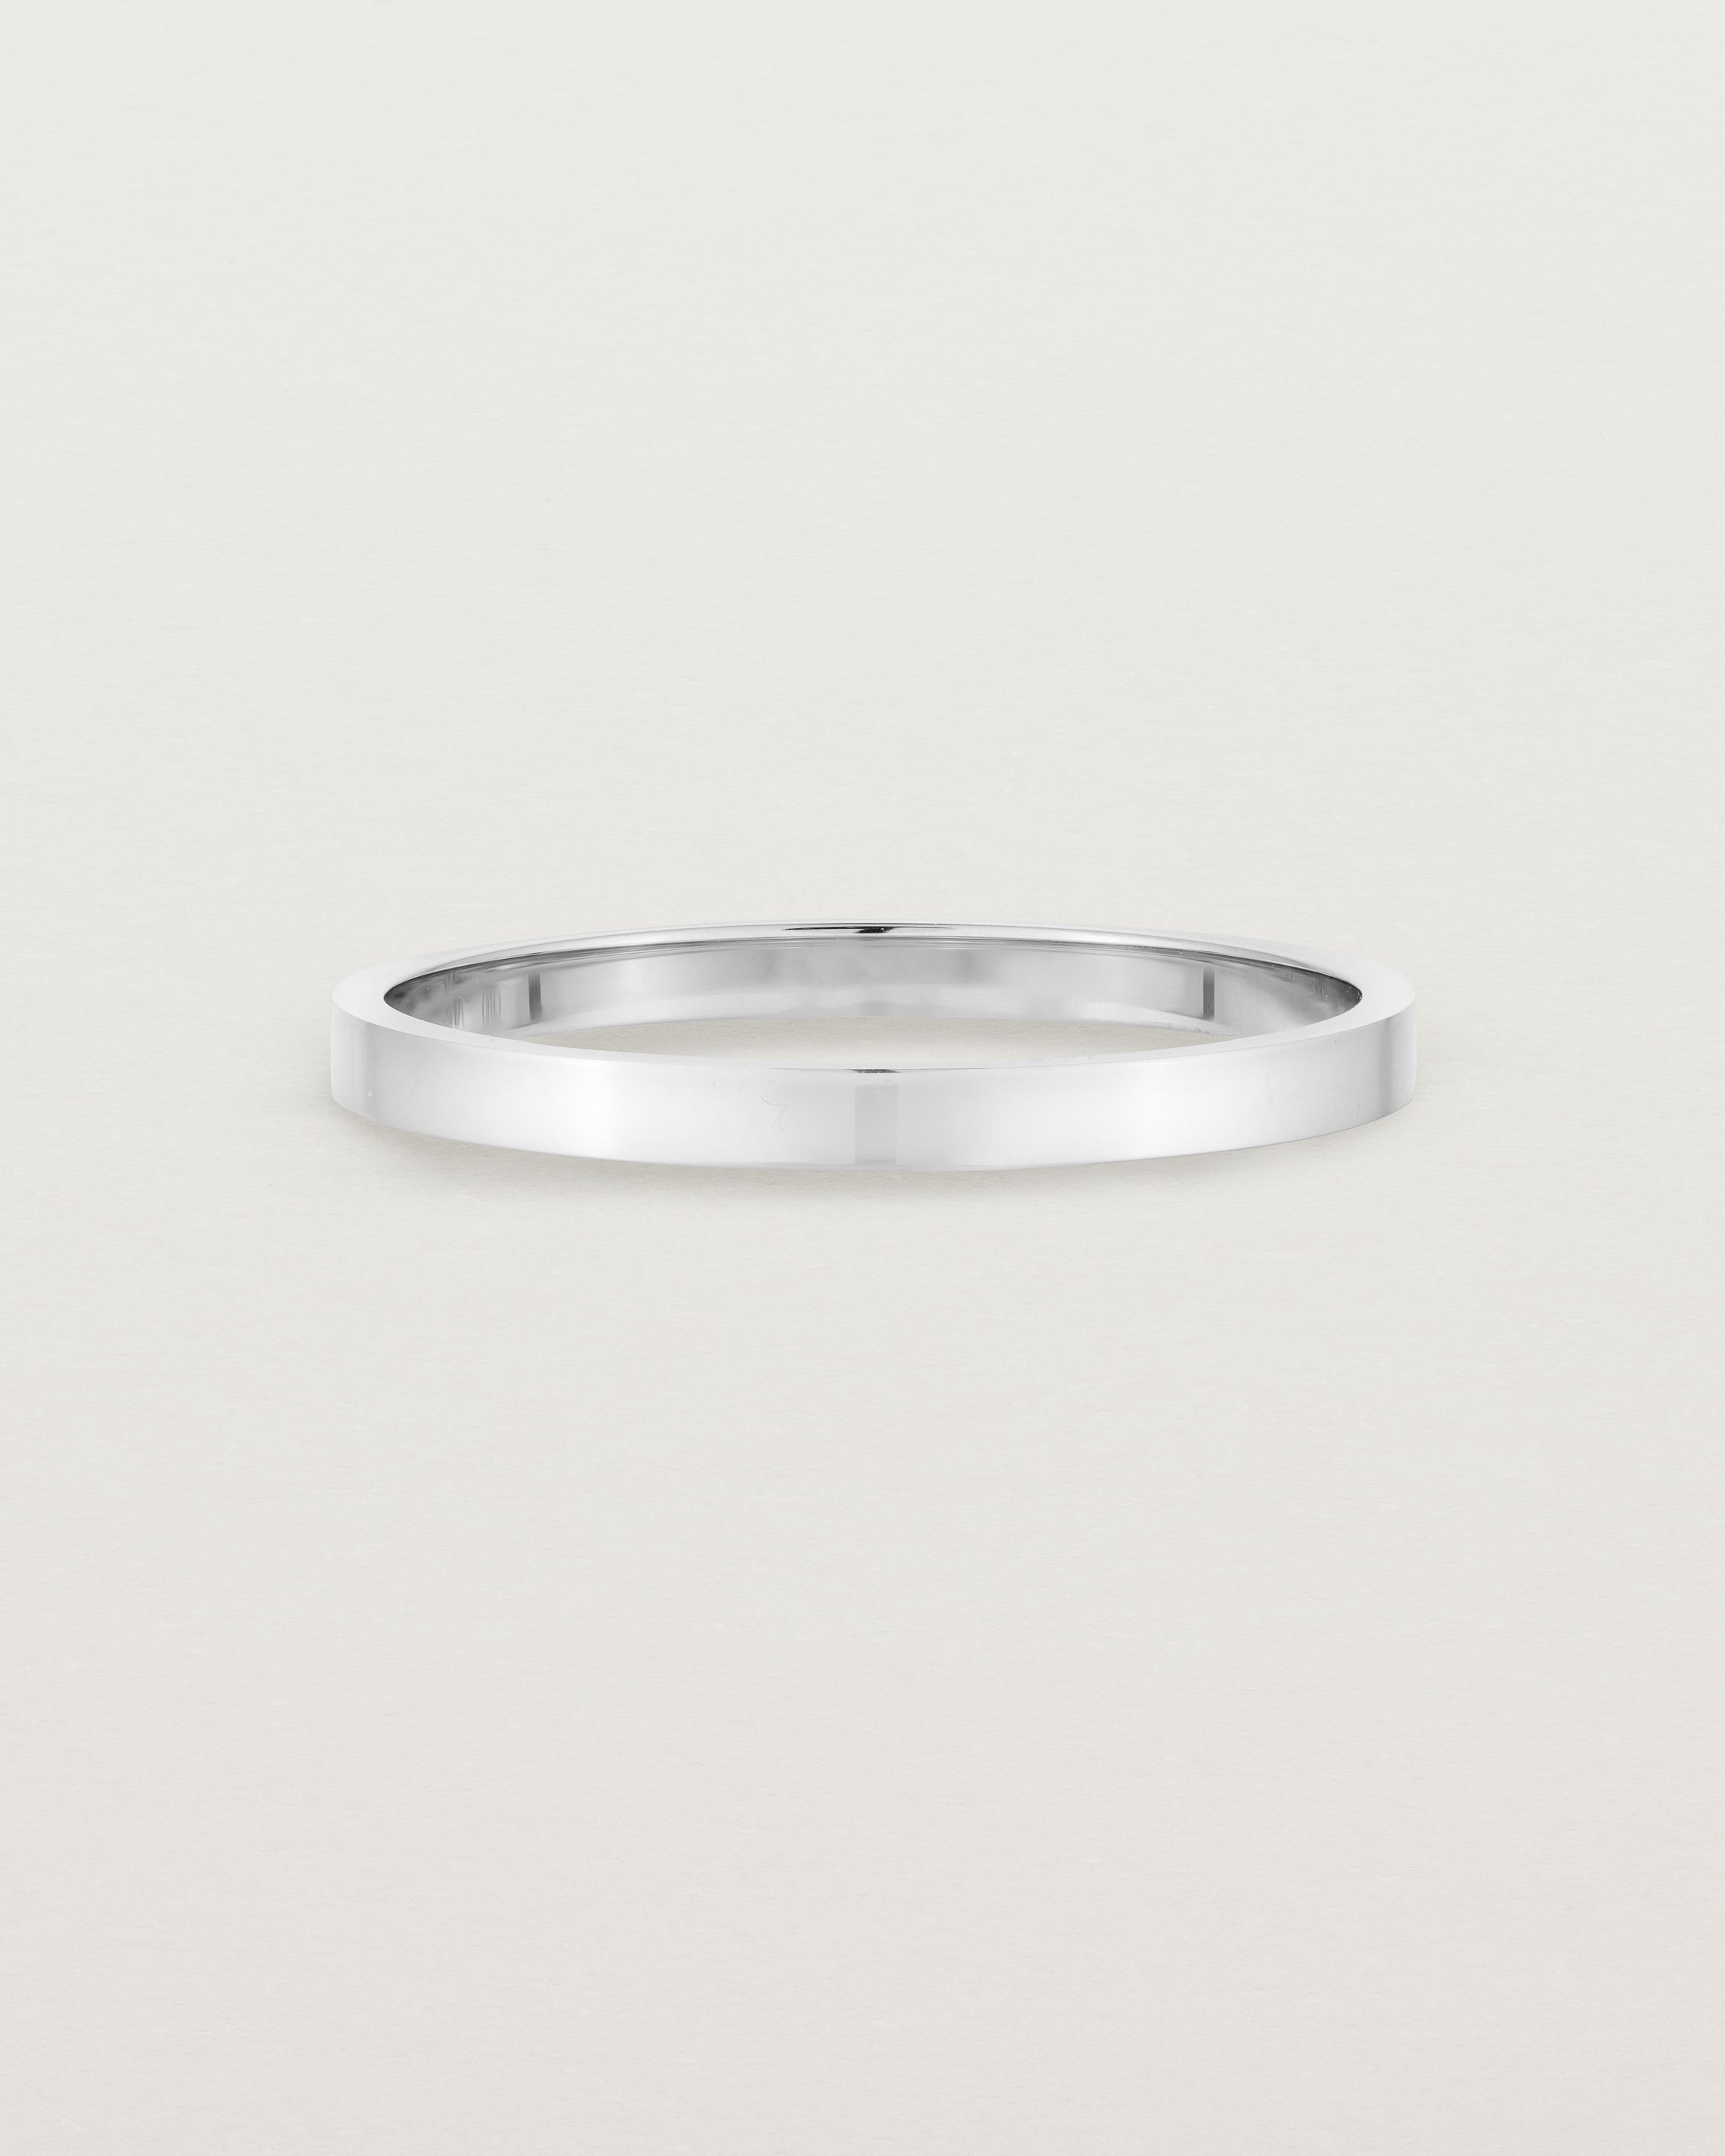 Our square profile, flat wedding band crafted in white gold